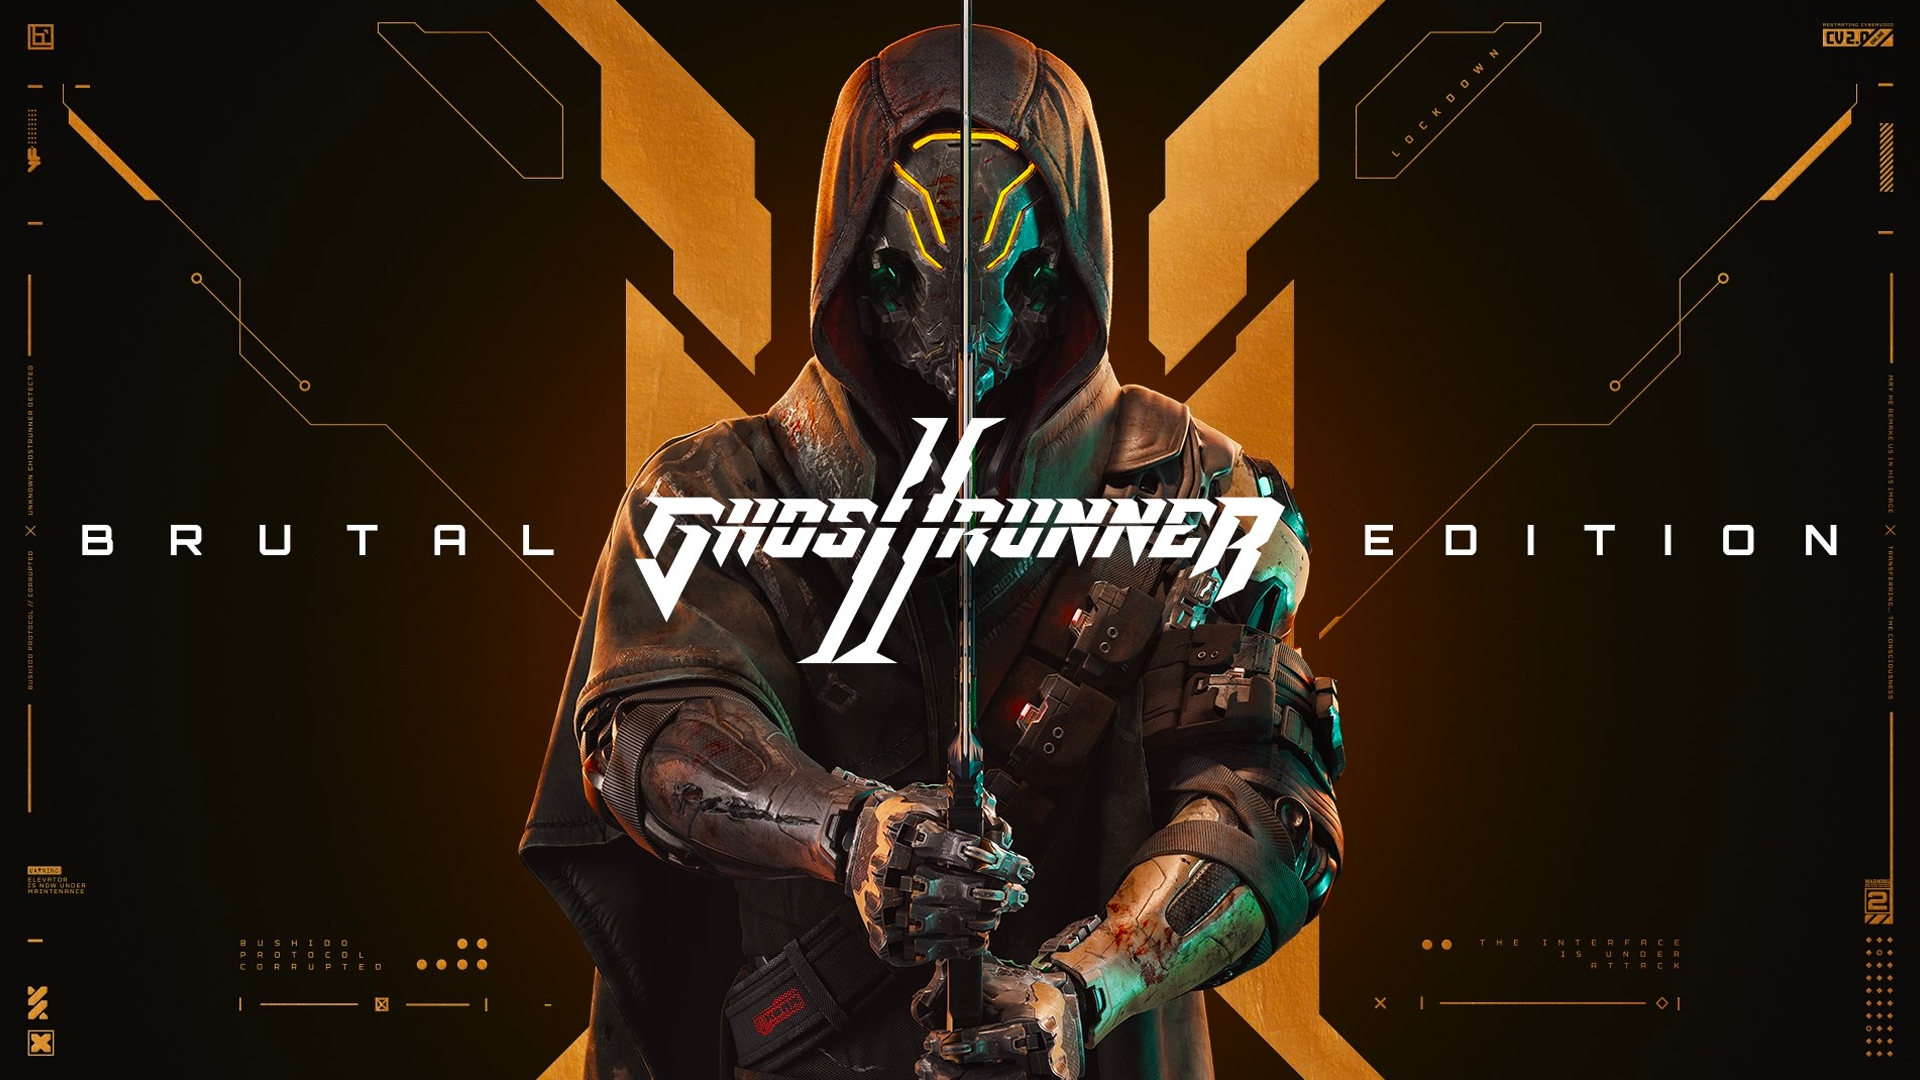 Ghostrunner Wallpaper 4K, PlayStation 4, PC Games, Xbox One